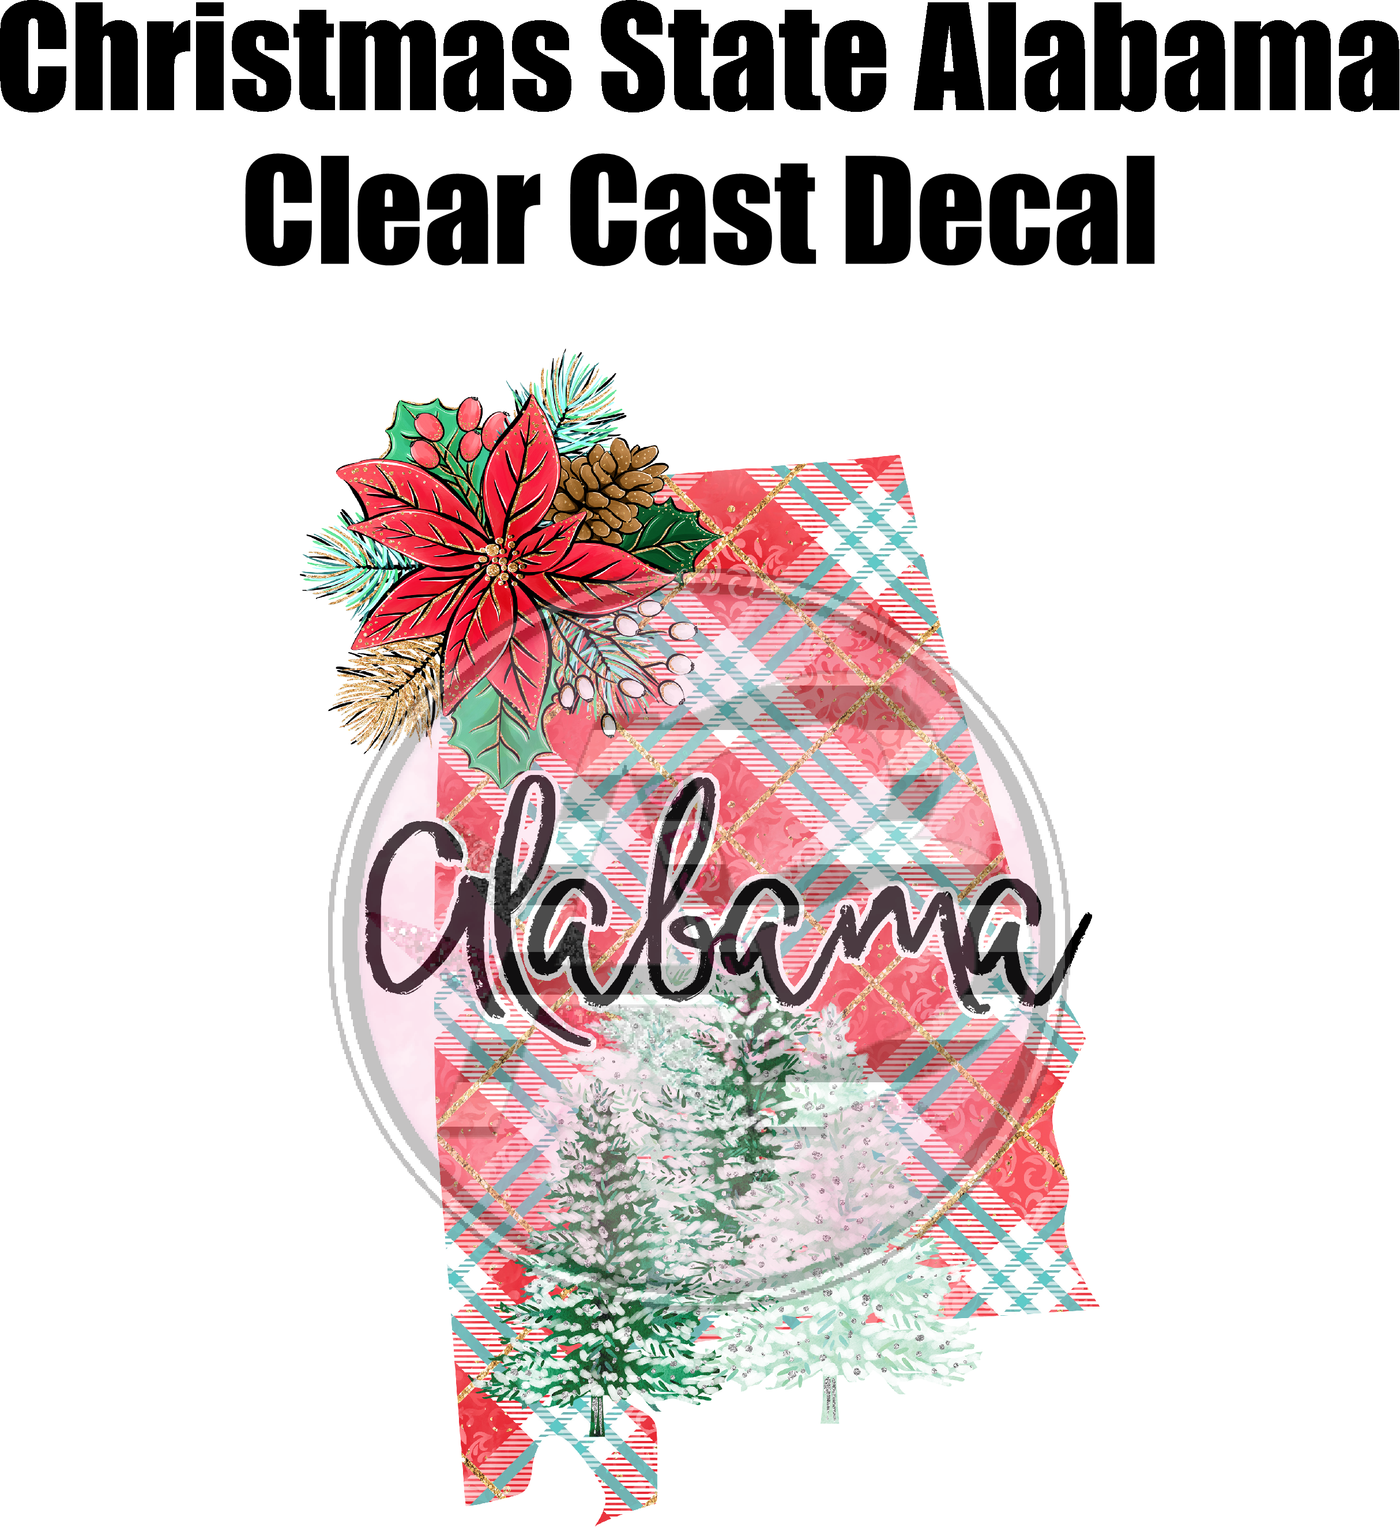 Christmas State Alabama - Clear Cast Decal